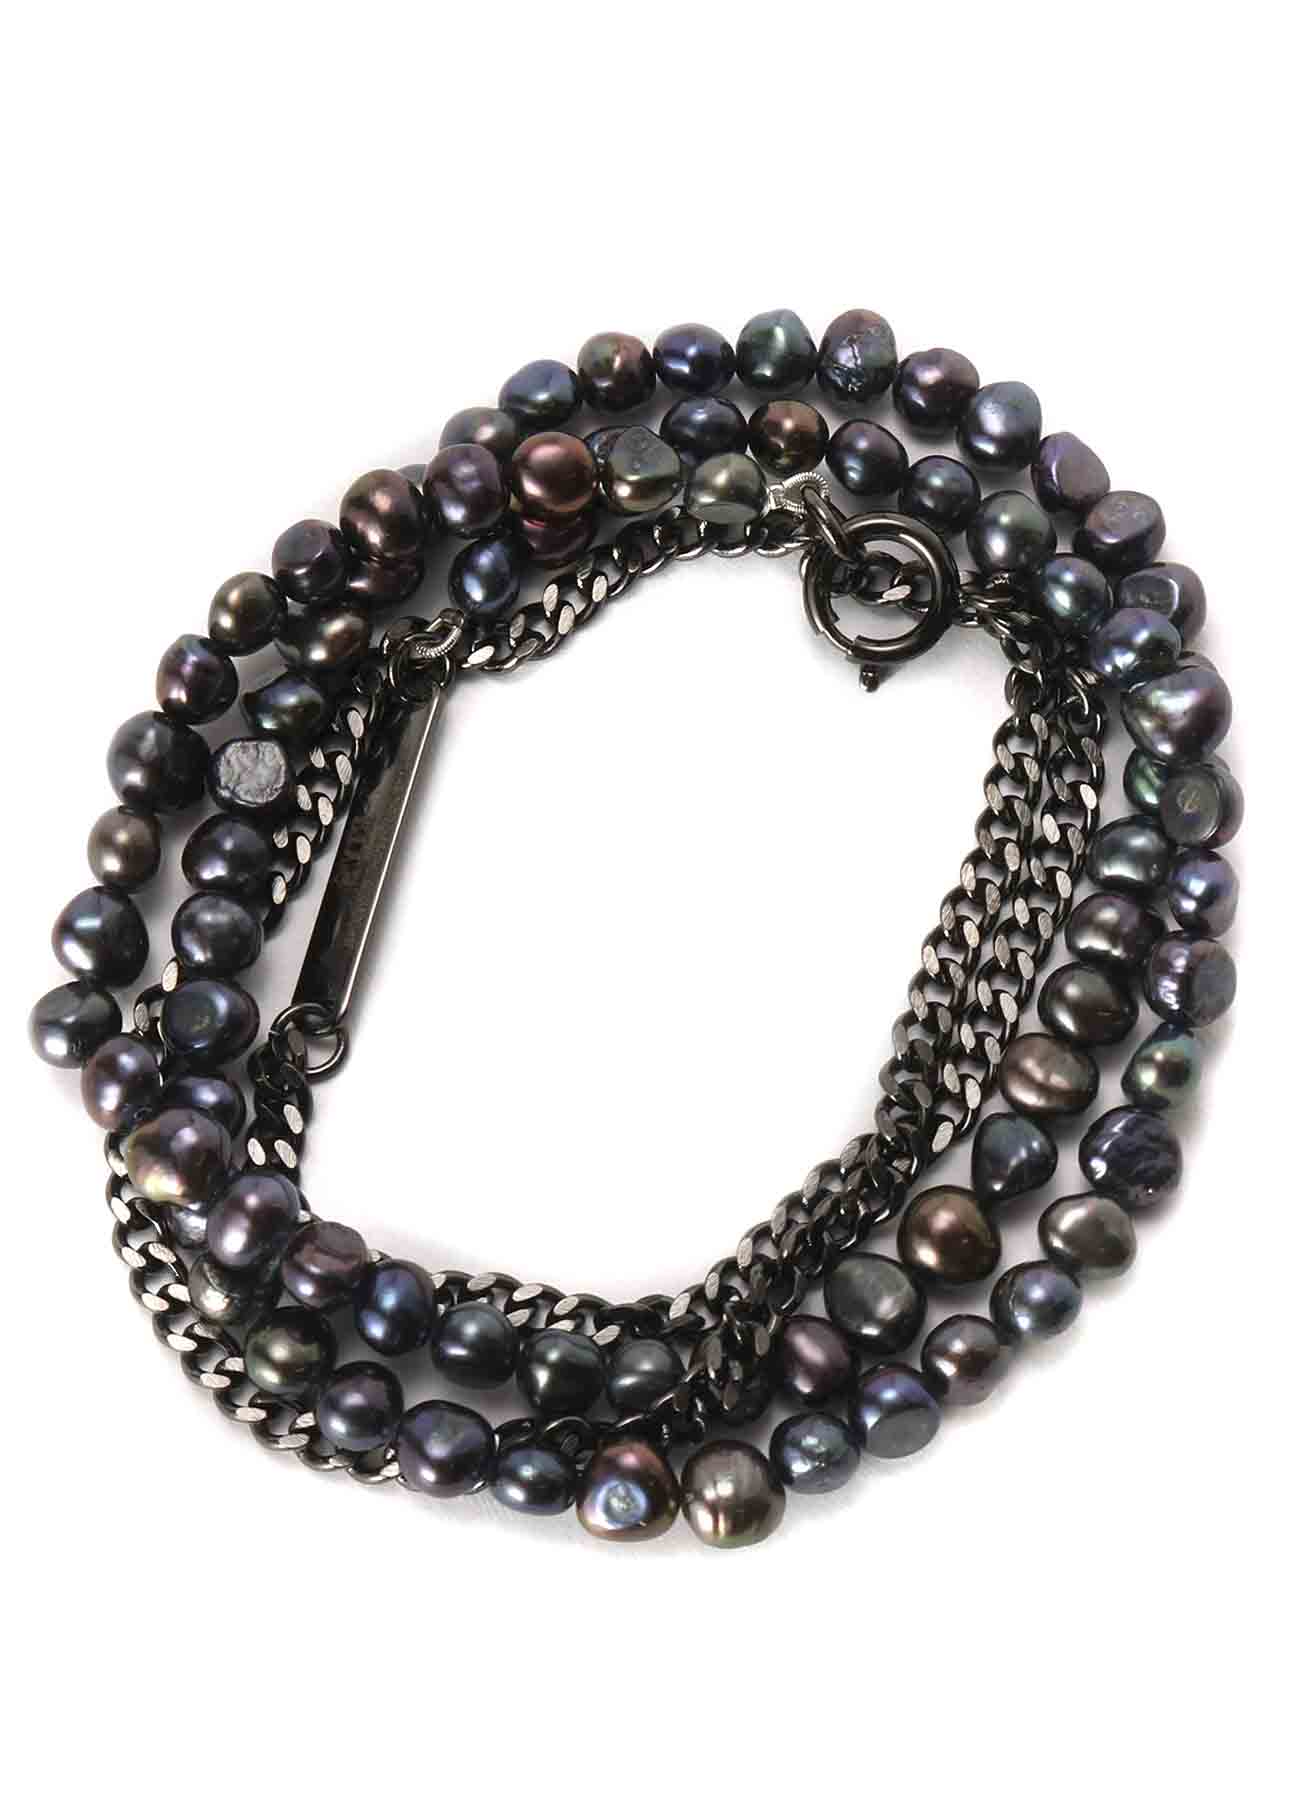 FRESH WATER BLACK PEARL NECKLACE